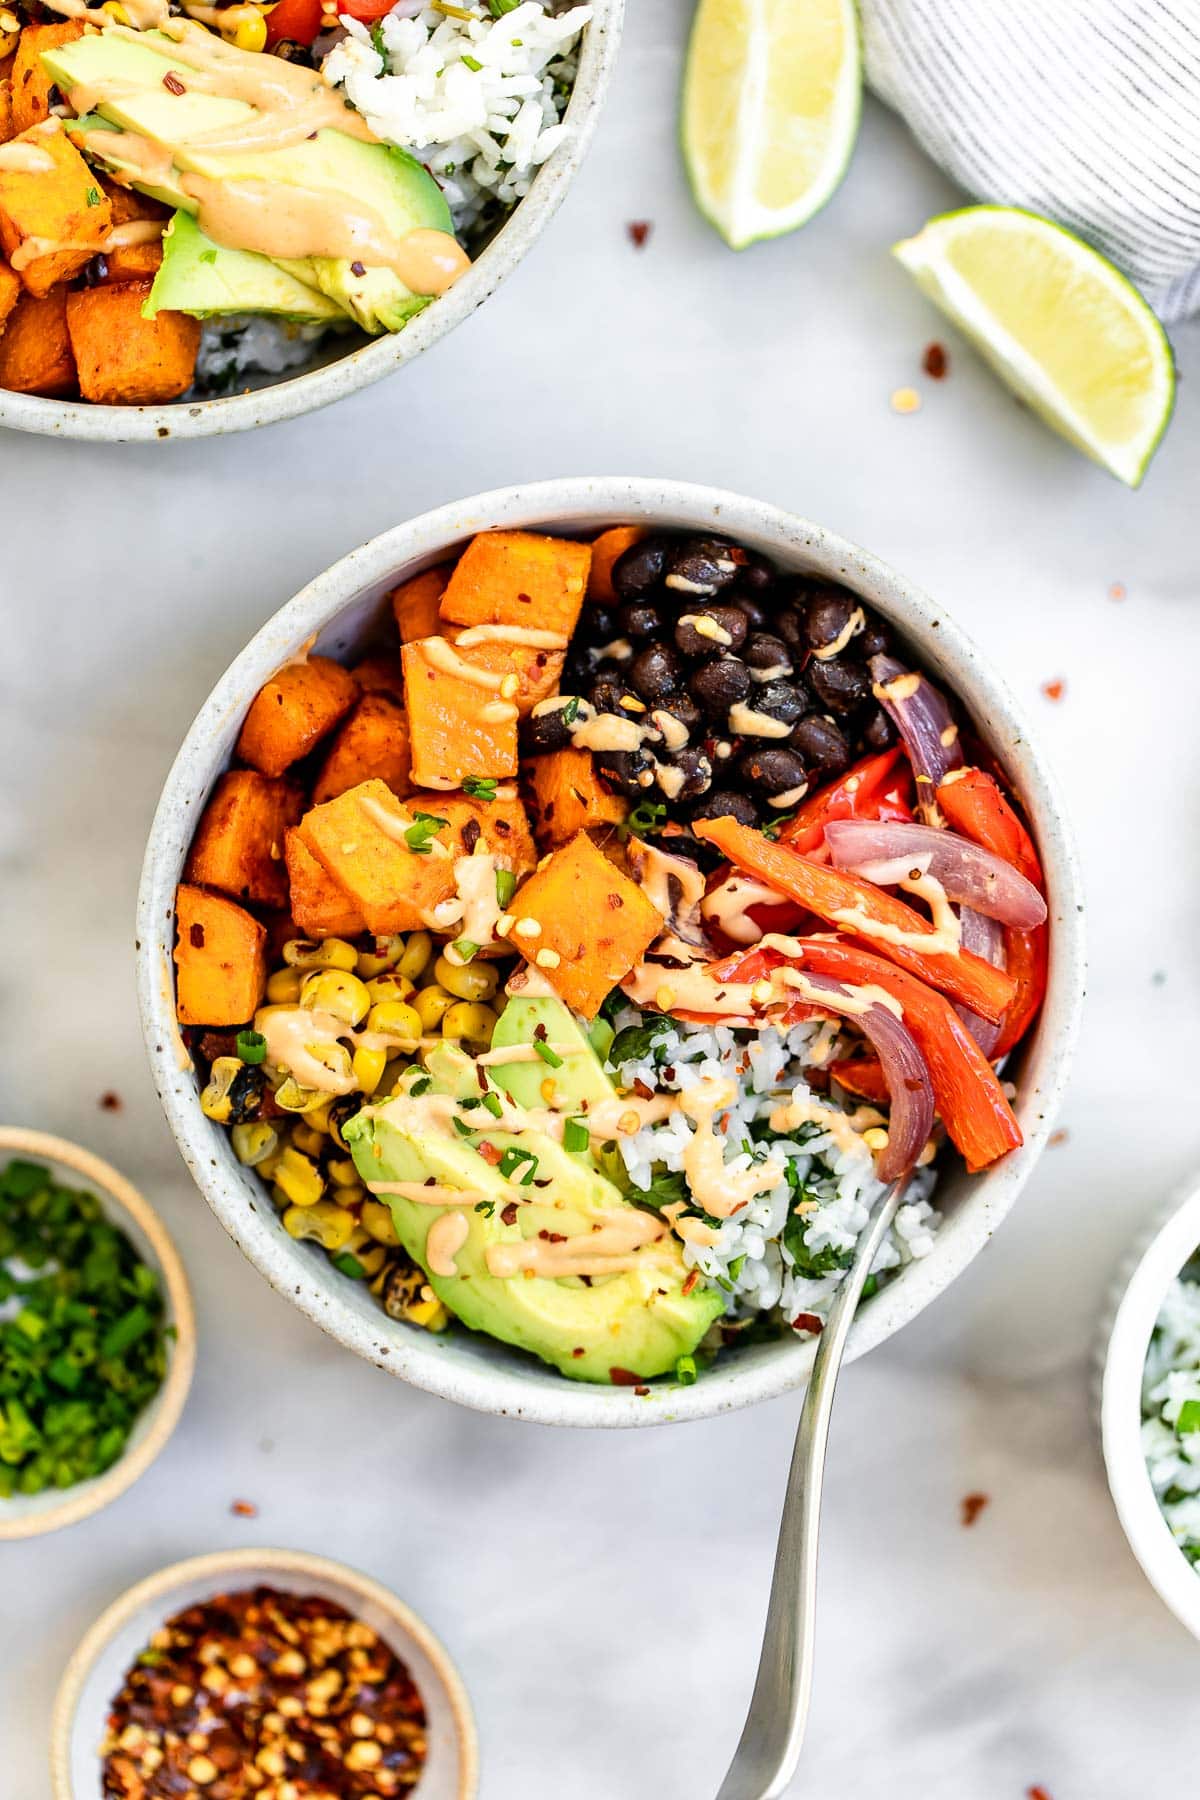 Two bowls with the roasted veggies, sweet potato and black beans.